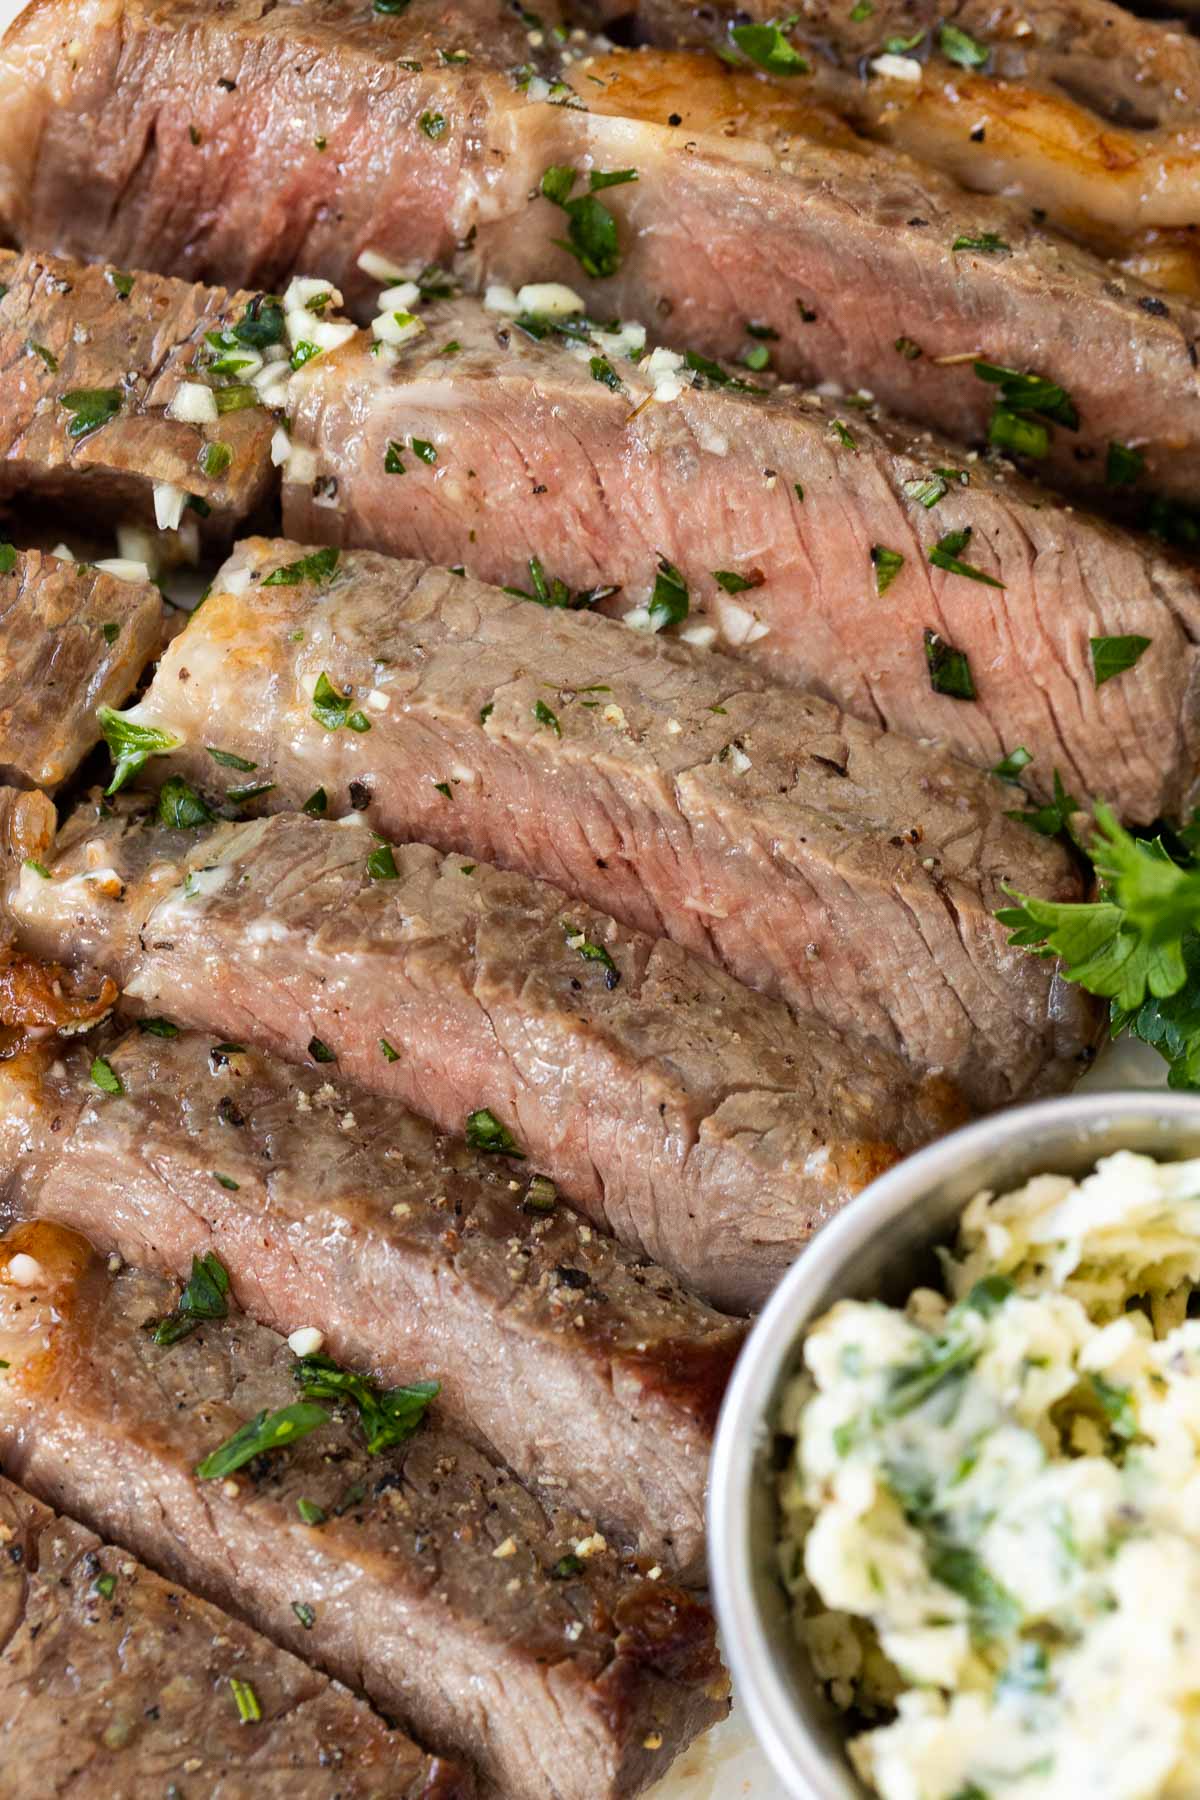 A sliced medium-cooked steak next to a small bowl of garlic butter.